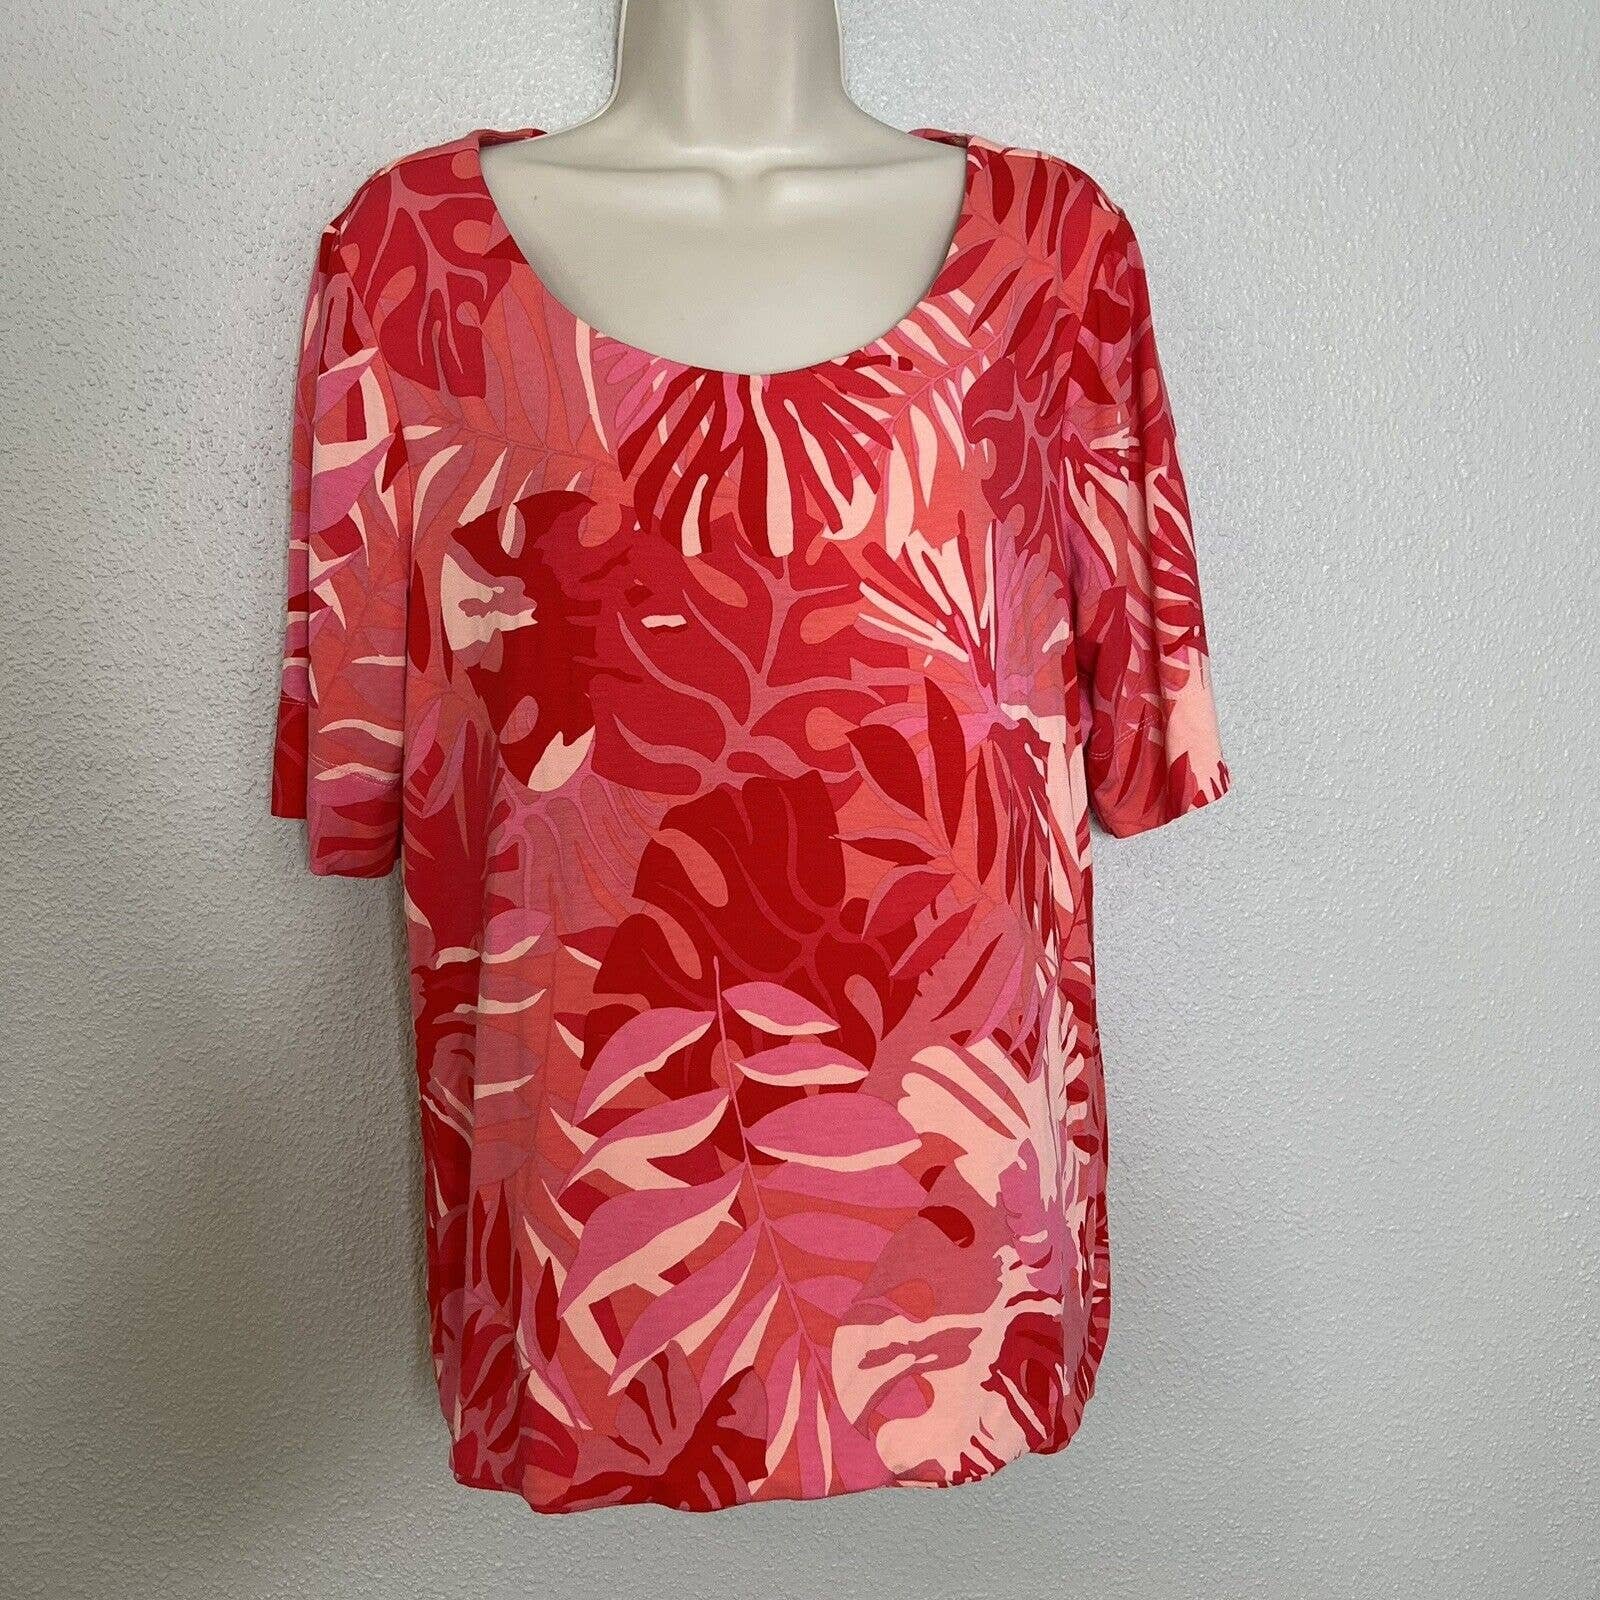 Simple Chicos Tropical Print Knit Top Shirt 2 Large Kyr